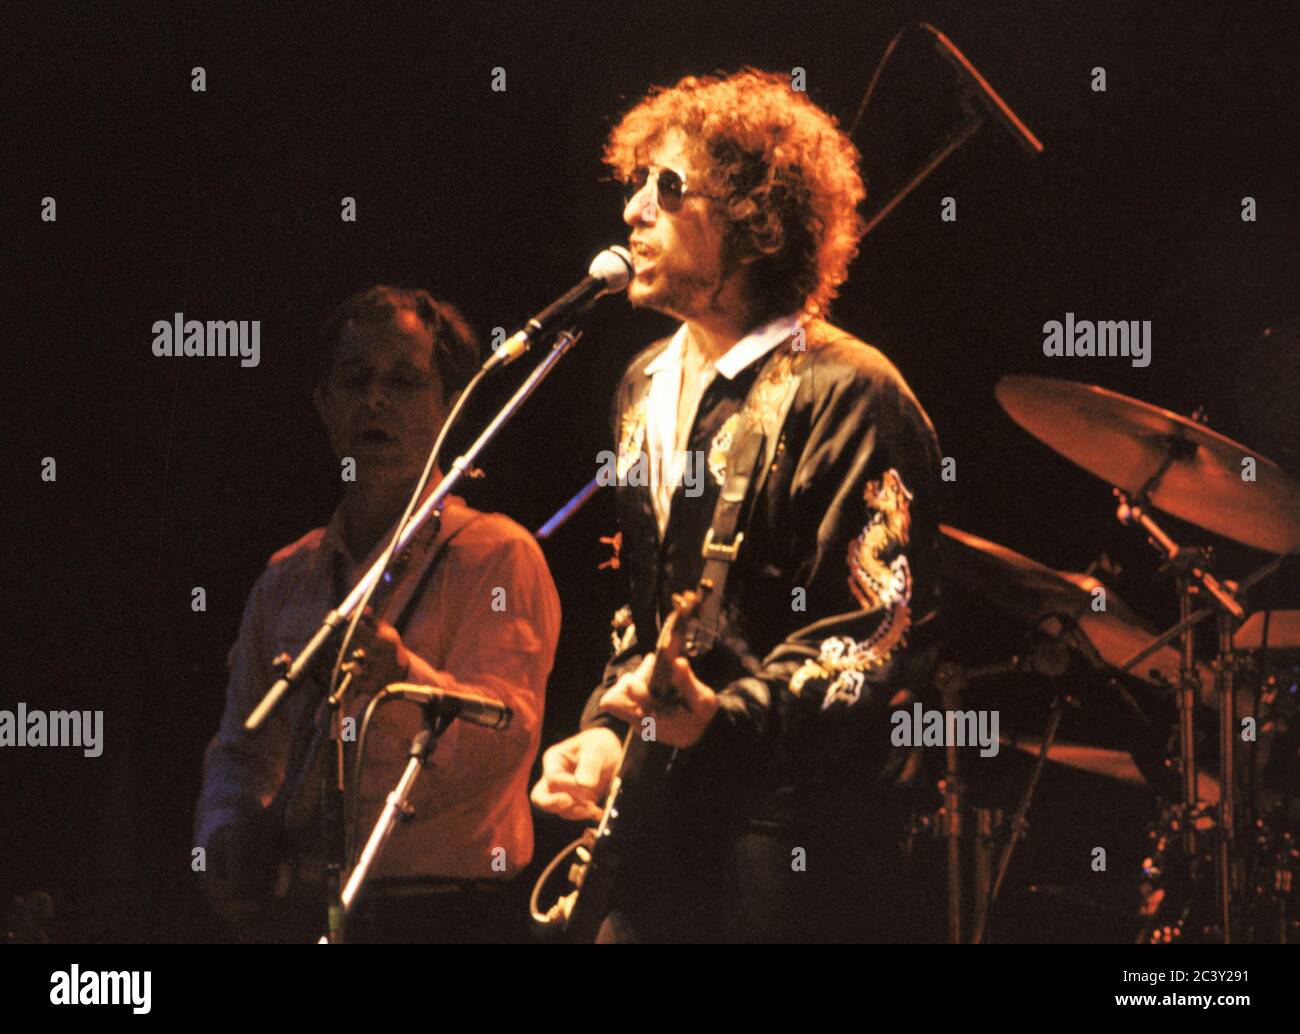 Bob Dylan in concert at Earl's Court Exhibition Hall,London   26th June 1981 Stock Photo